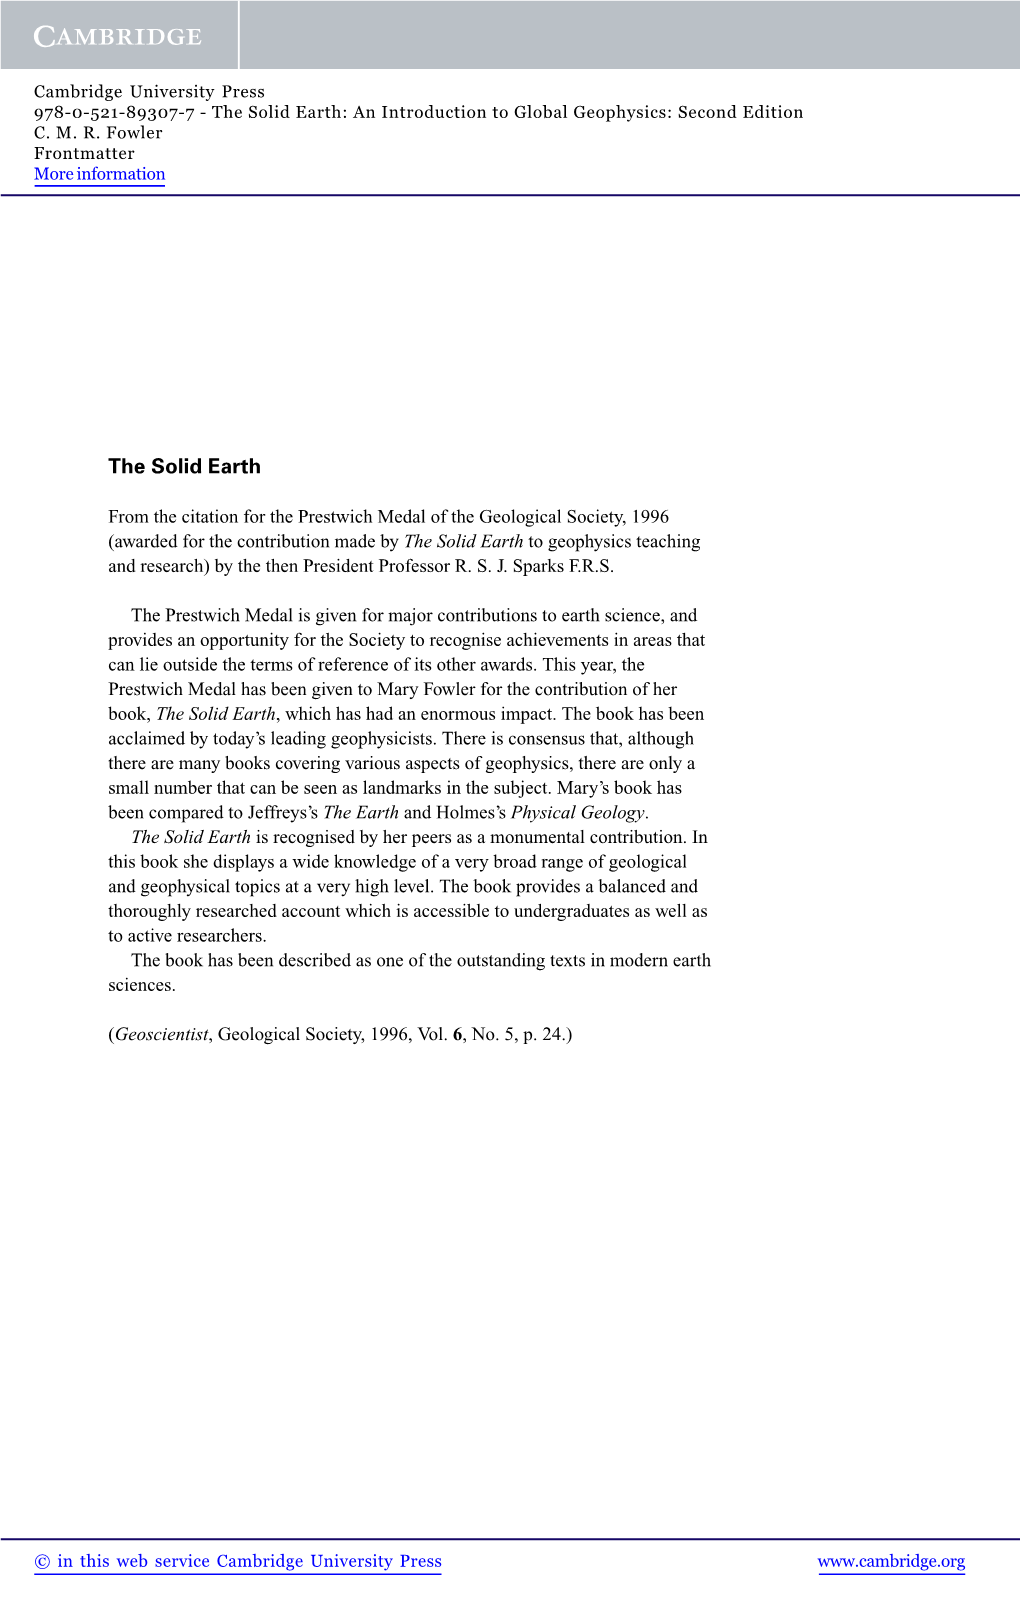 The Solid Earth: an Introduction to Global Geophysics: Second Edition C